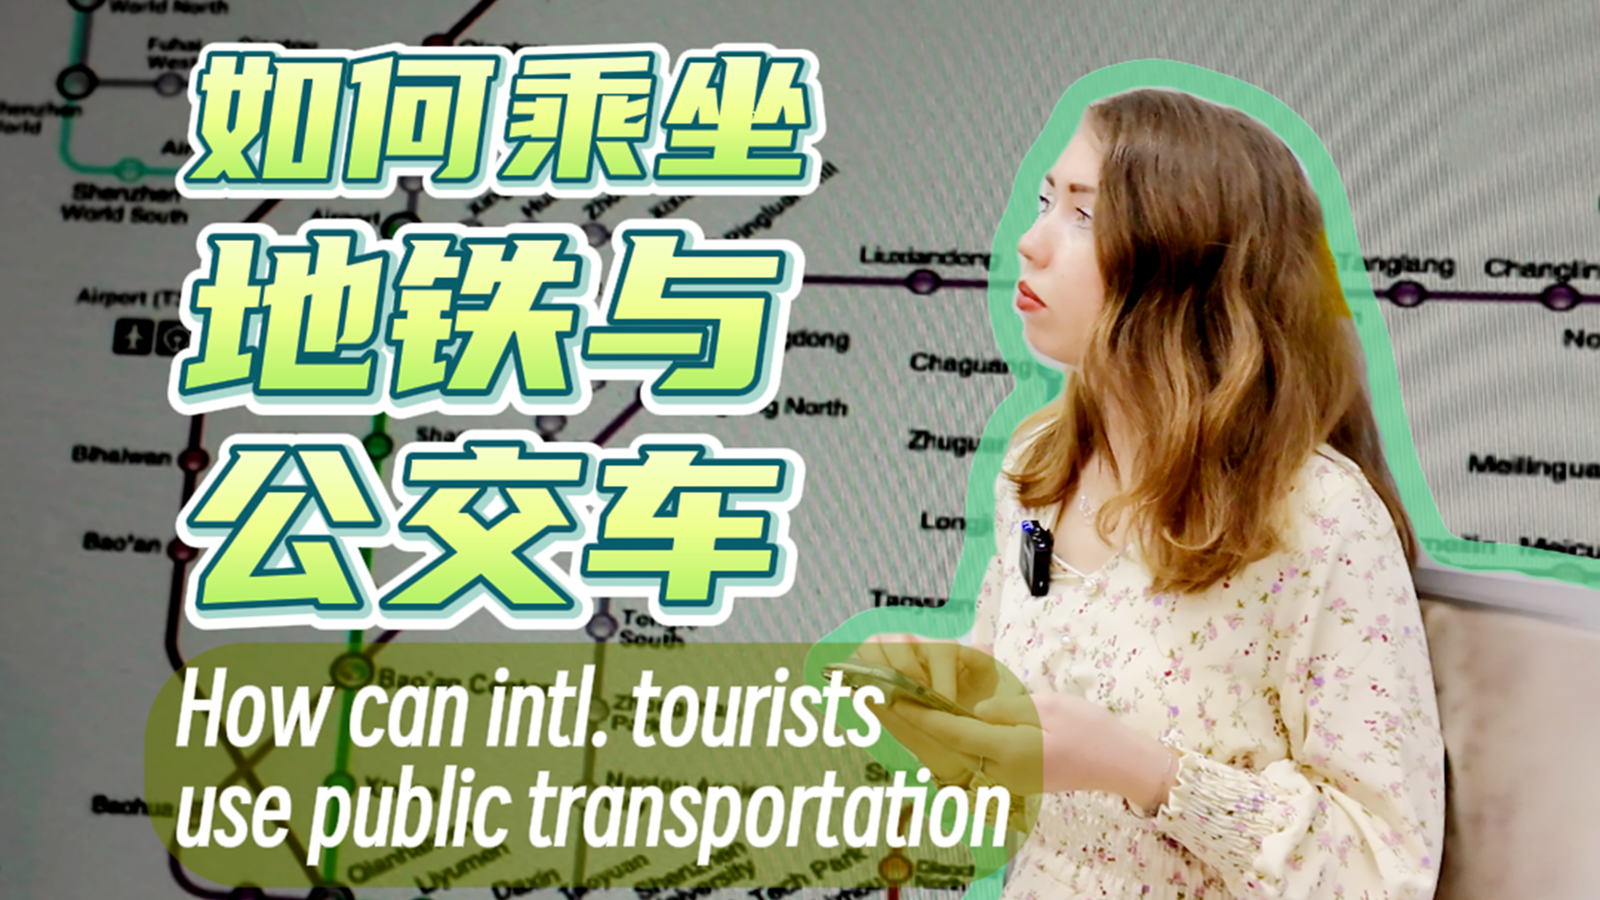 A Foreigner's Guide to SZ: Using public transportation